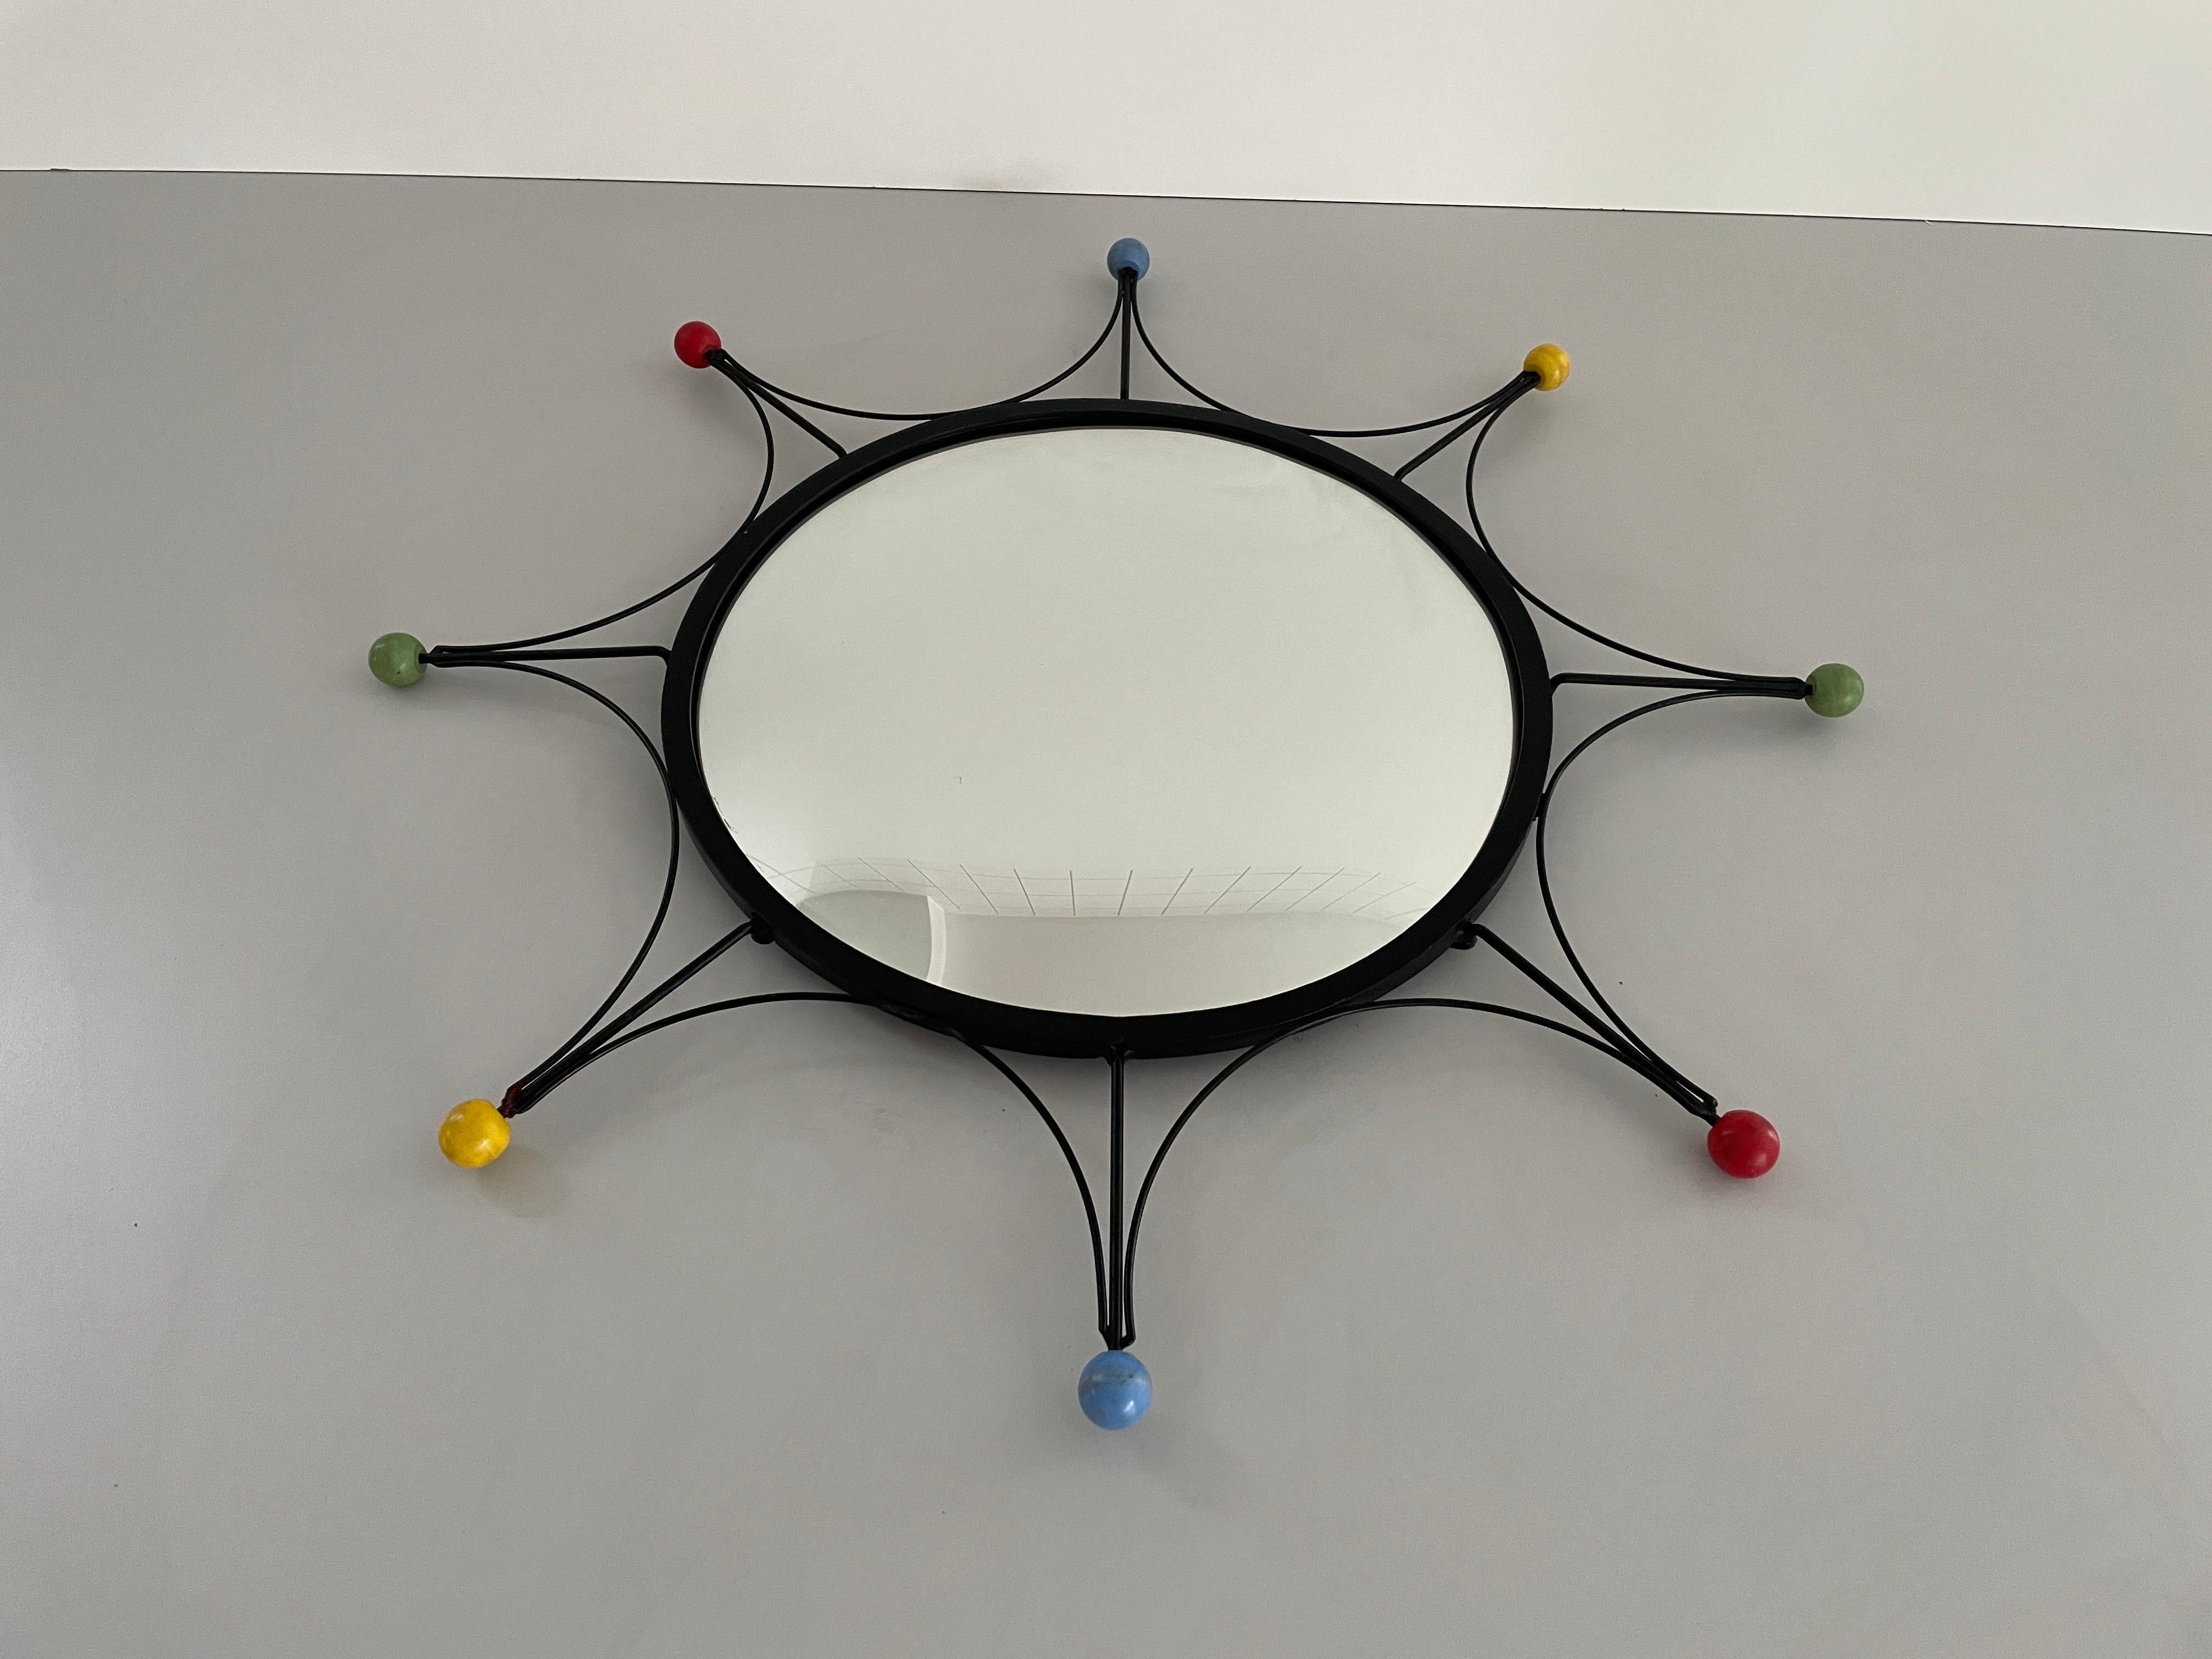 Round Black Metal Atomic Style Wall Mirror, 1980s, France

It is very ideal and suitable for all living areas.

No damage, no crack.
Wear consistent with age and use.

Measurements: 
Diameter: 69 cm
Mirror diameter: 41 cm
Depth: 3 cm